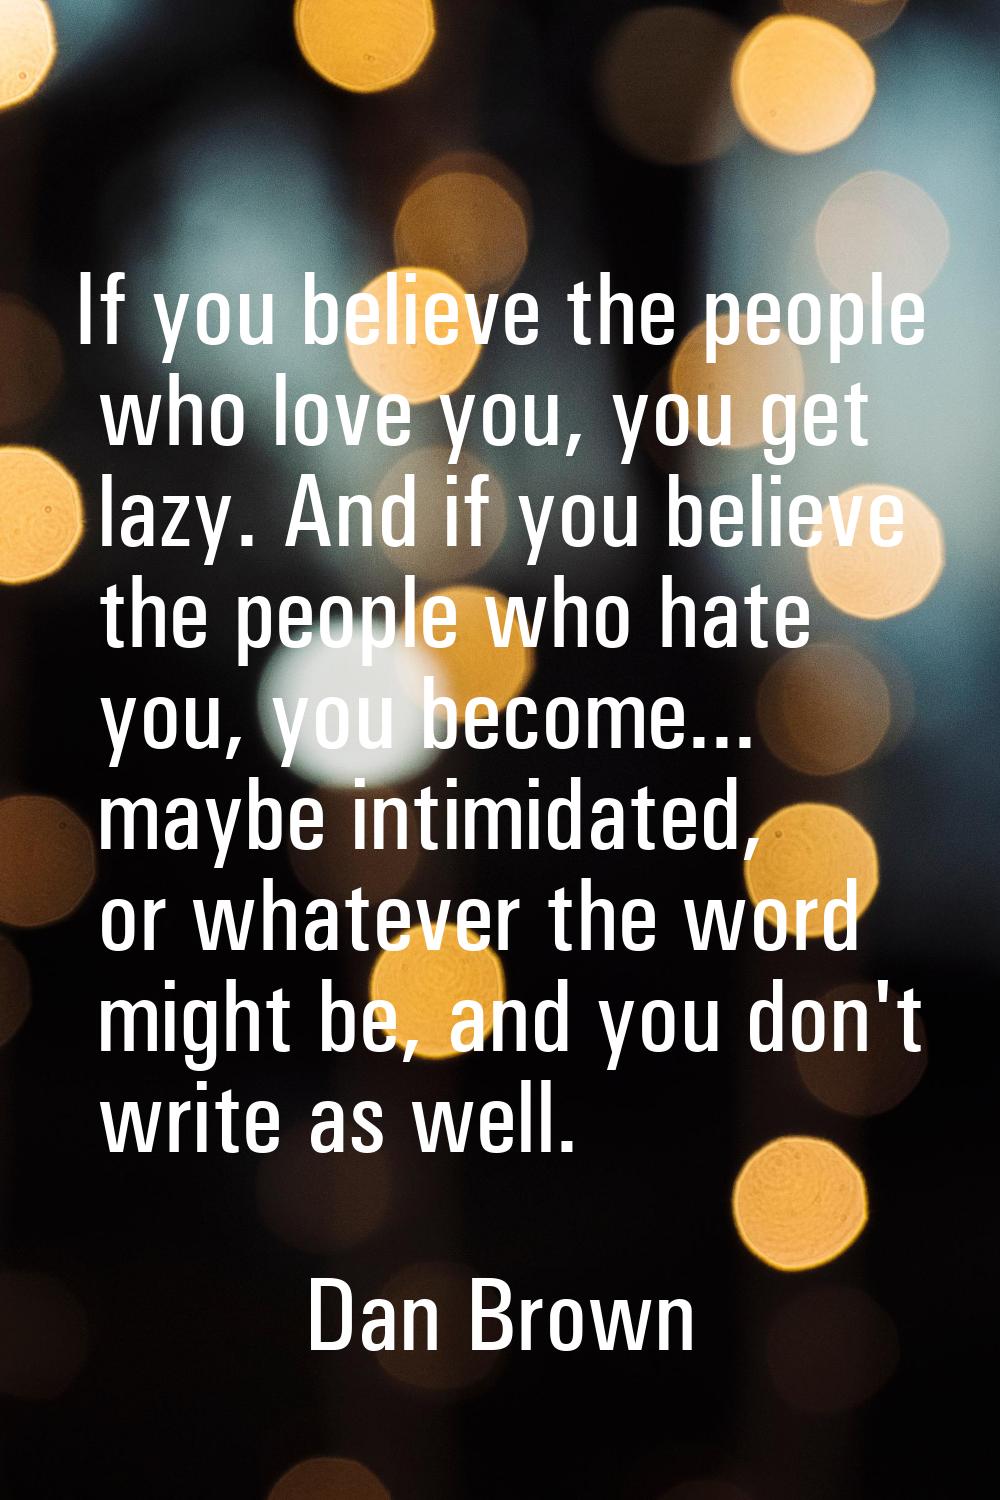 If you believe the people who love you, you get lazy. And if you believe the people who hate you, y